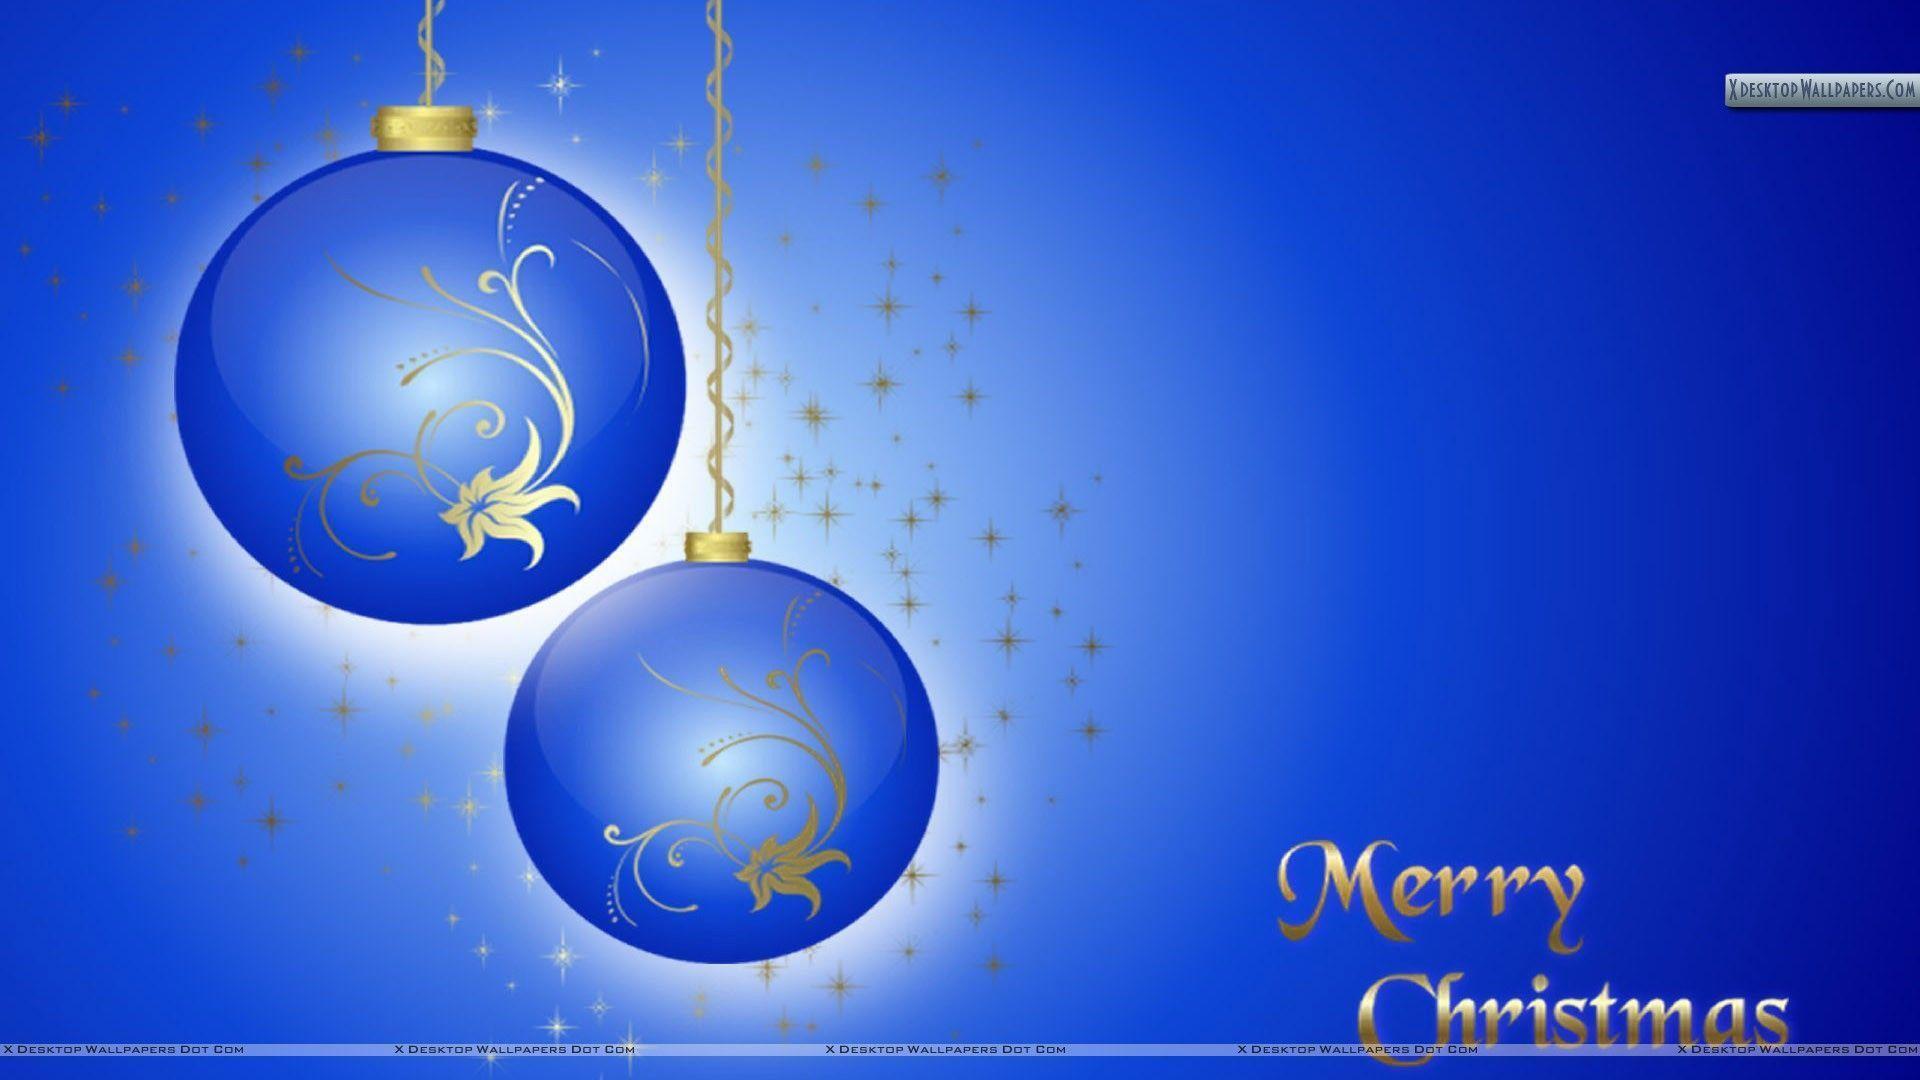 Merry Christmas Red Baloons & Background Wallpaper